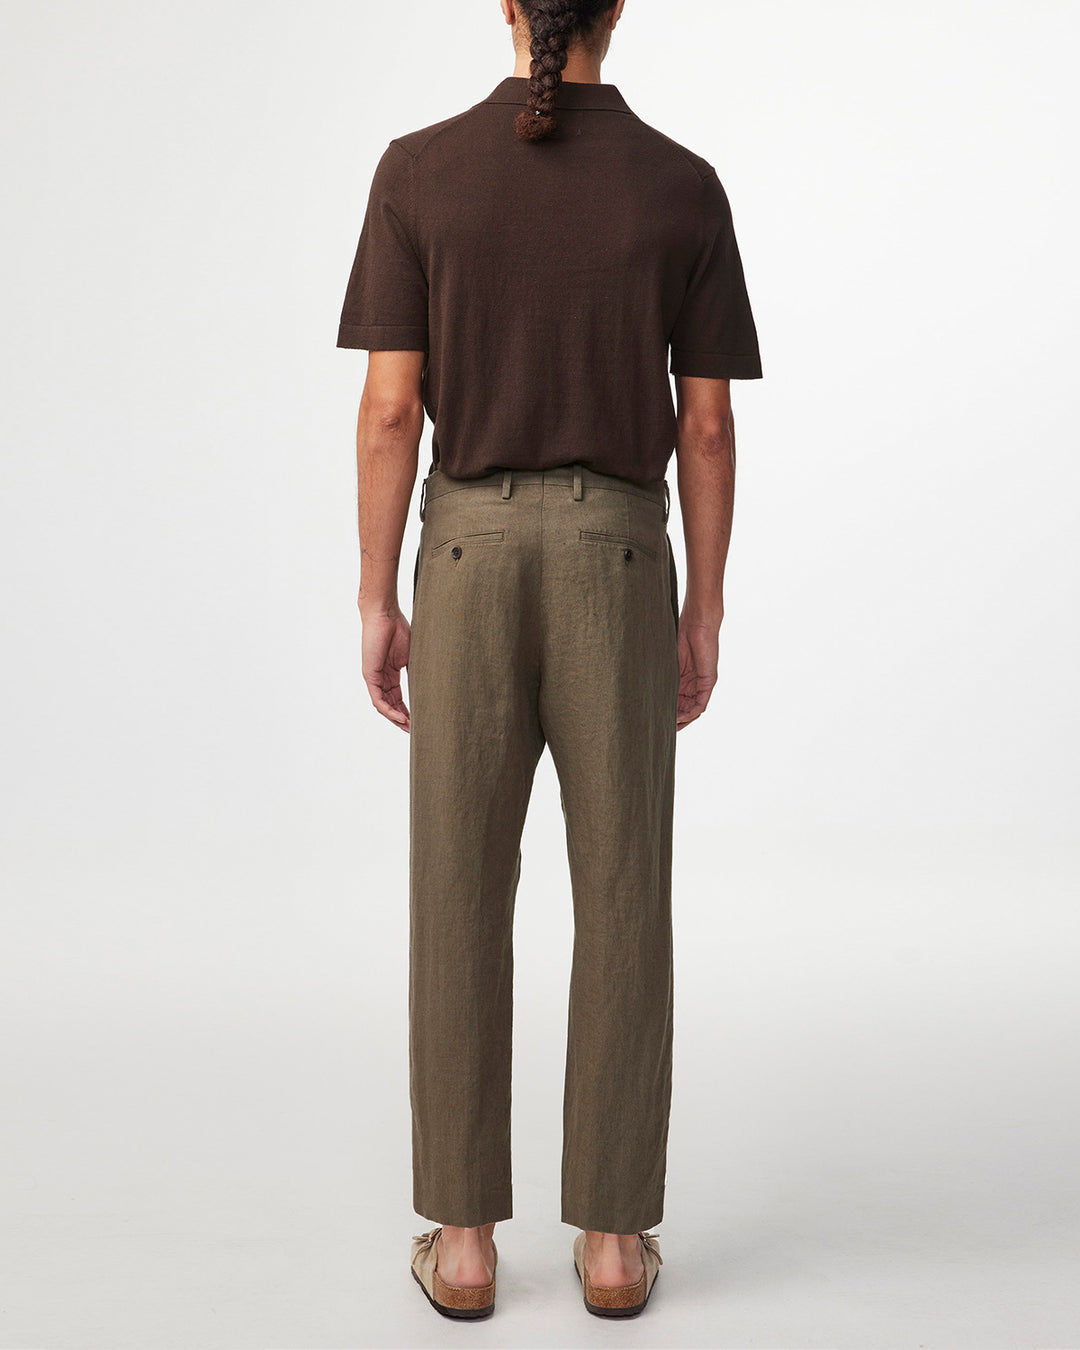 NN07 - Bill 1196 Linen Pant in Khaki Army | Buster McGee